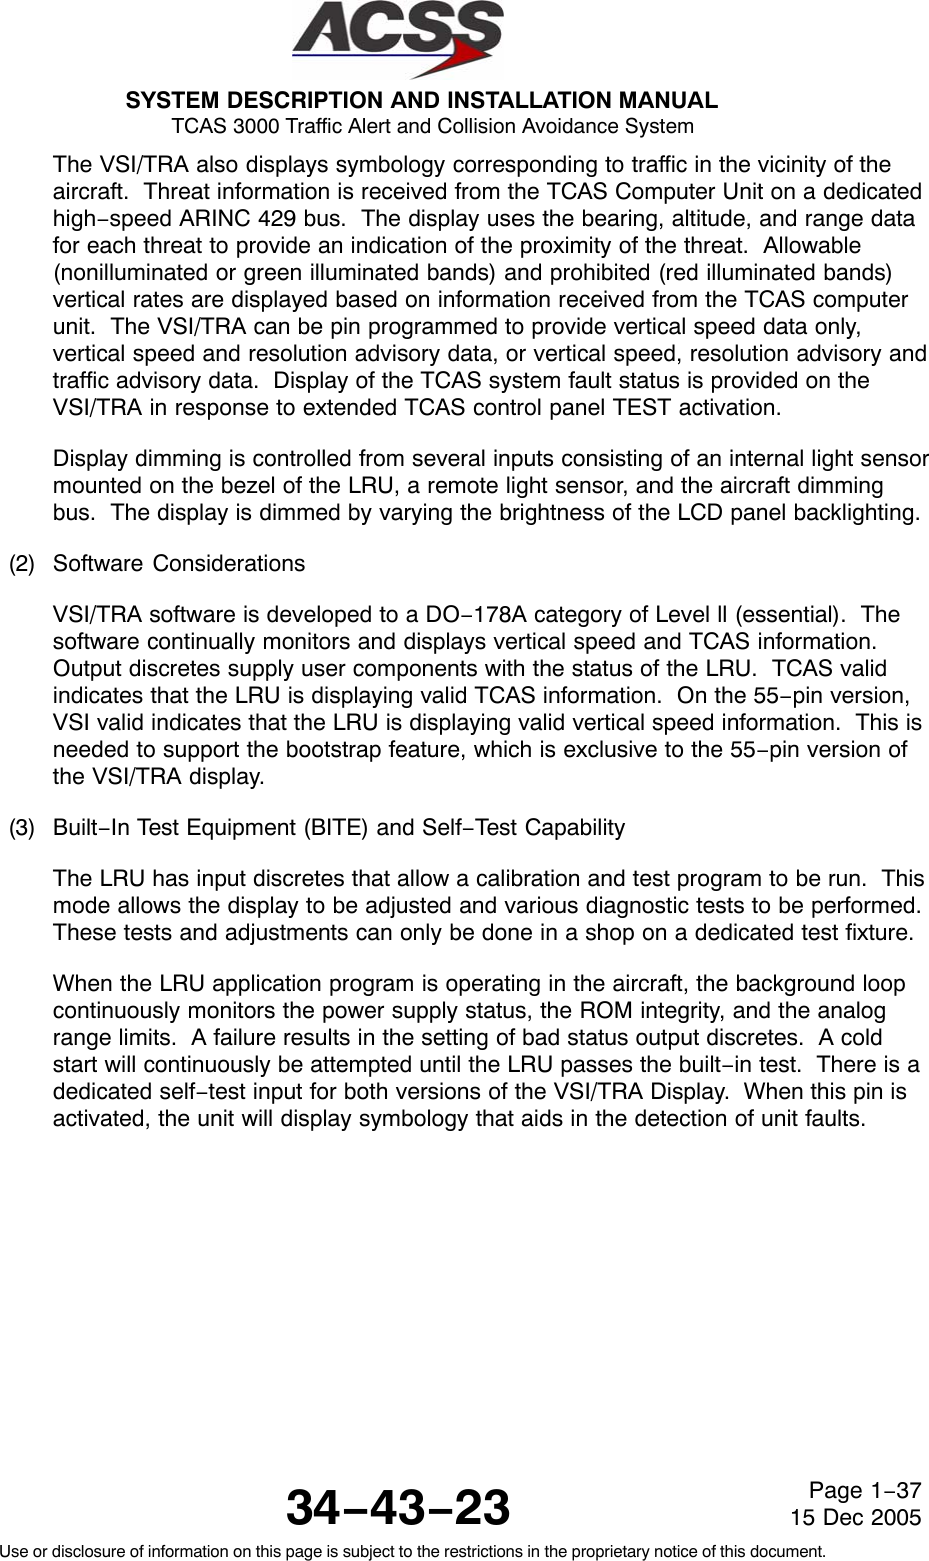 SYSTEM DESCRIPTION AND INSTALLATION MANUAL TCAS 3000 Traffic Alert and Collision Avoidance System34−43−23Use or disclosure of information on this page is subject to the restrictions in the proprietary notice of this document.Page 1−3715 Dec 2005The VSI/TRA also displays symbology corresponding to traffic in the vicinity of theaircraft.  Threat information is received from the TCAS Computer Unit on a dedicatedhigh−speed ARINC 429 bus.  The display uses the bearing, altitude, and range datafor each threat to provide an indication of the proximity of the threat.  Allowable(nonilluminated or green illuminated bands) and prohibited (red illuminated bands)vertical rates are displayed based on information received from the TCAS computerunit.  The VSI/TRA can be pin programmed to provide vertical speed data only,vertical speed and resolution advisory data, or vertical speed, resolution advisory andtraffic advisory data.  Display of the TCAS system fault status is provided on theVSI/TRA in response to extended TCAS control panel TEST activation.Display dimming is controlled from several inputs consisting of an internal light sensormounted on the bezel of the LRU, a remote light sensor, and the aircraft dimmingbus.  The display is dimmed by varying the brightness of the LCD panel backlighting.(2) Software ConsiderationsVSI/TRA software is developed to a DO−178A category of Level ll (essential).  Thesoftware continually monitors and displays vertical speed and TCAS information.Output discretes supply user components with the status of the LRU.  TCAS validindicates that the LRU is displaying valid TCAS information.  On the 55−pin version,VSI valid indicates that the LRU is displaying valid vertical speed information.  This isneeded to support the bootstrap feature, which is exclusive to the 55−pin version ofthe VSI/TRA display.(3) Built−In Test Equipment (BITE) and Self−Test CapabilityThe LRU has input discretes that allow a calibration and test program to be run.  Thismode allows the display to be adjusted and various diagnostic tests to be performed.These tests and adjustments can only be done in a shop on a dedicated test fixture.When the LRU application program is operating in the aircraft, the background loopcontinuously monitors the power supply status, the ROM integrity, and the analogrange limits.  A failure results in the setting of bad status output discretes.  A coldstart will continuously be attempted until the LRU passes the built−in test.  There is adedicated self−test input for both versions of the VSI/TRA Display.  When this pin isactivated, the unit will display symbology that aids in the detection of unit faults.